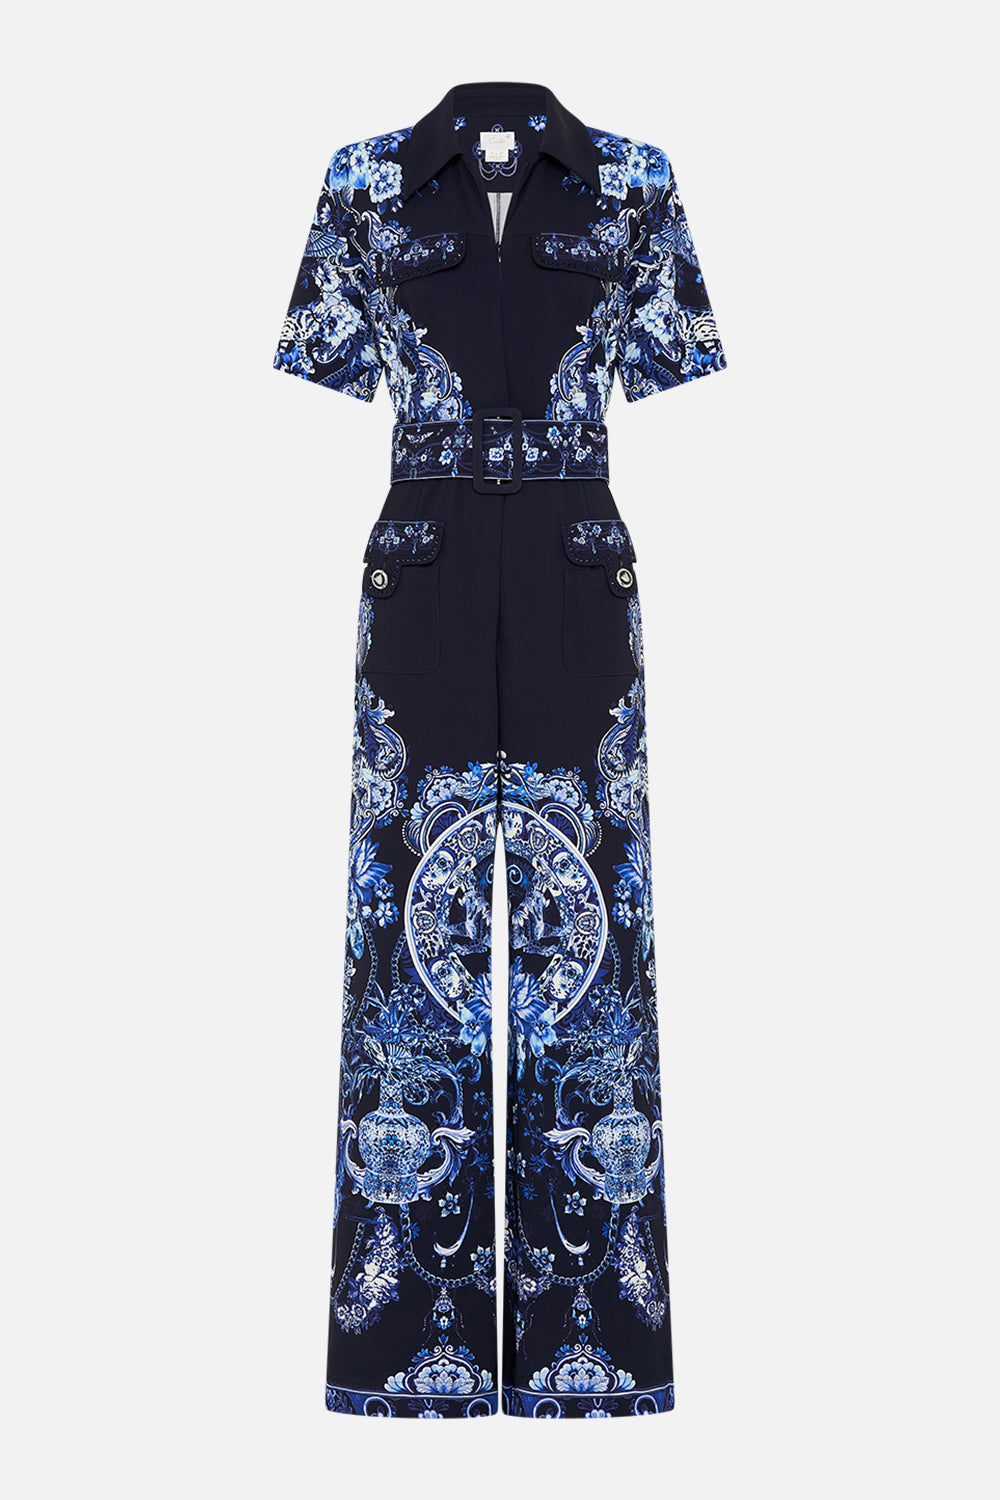 CAMILLA jumpsuit in Delft Dynasty print 